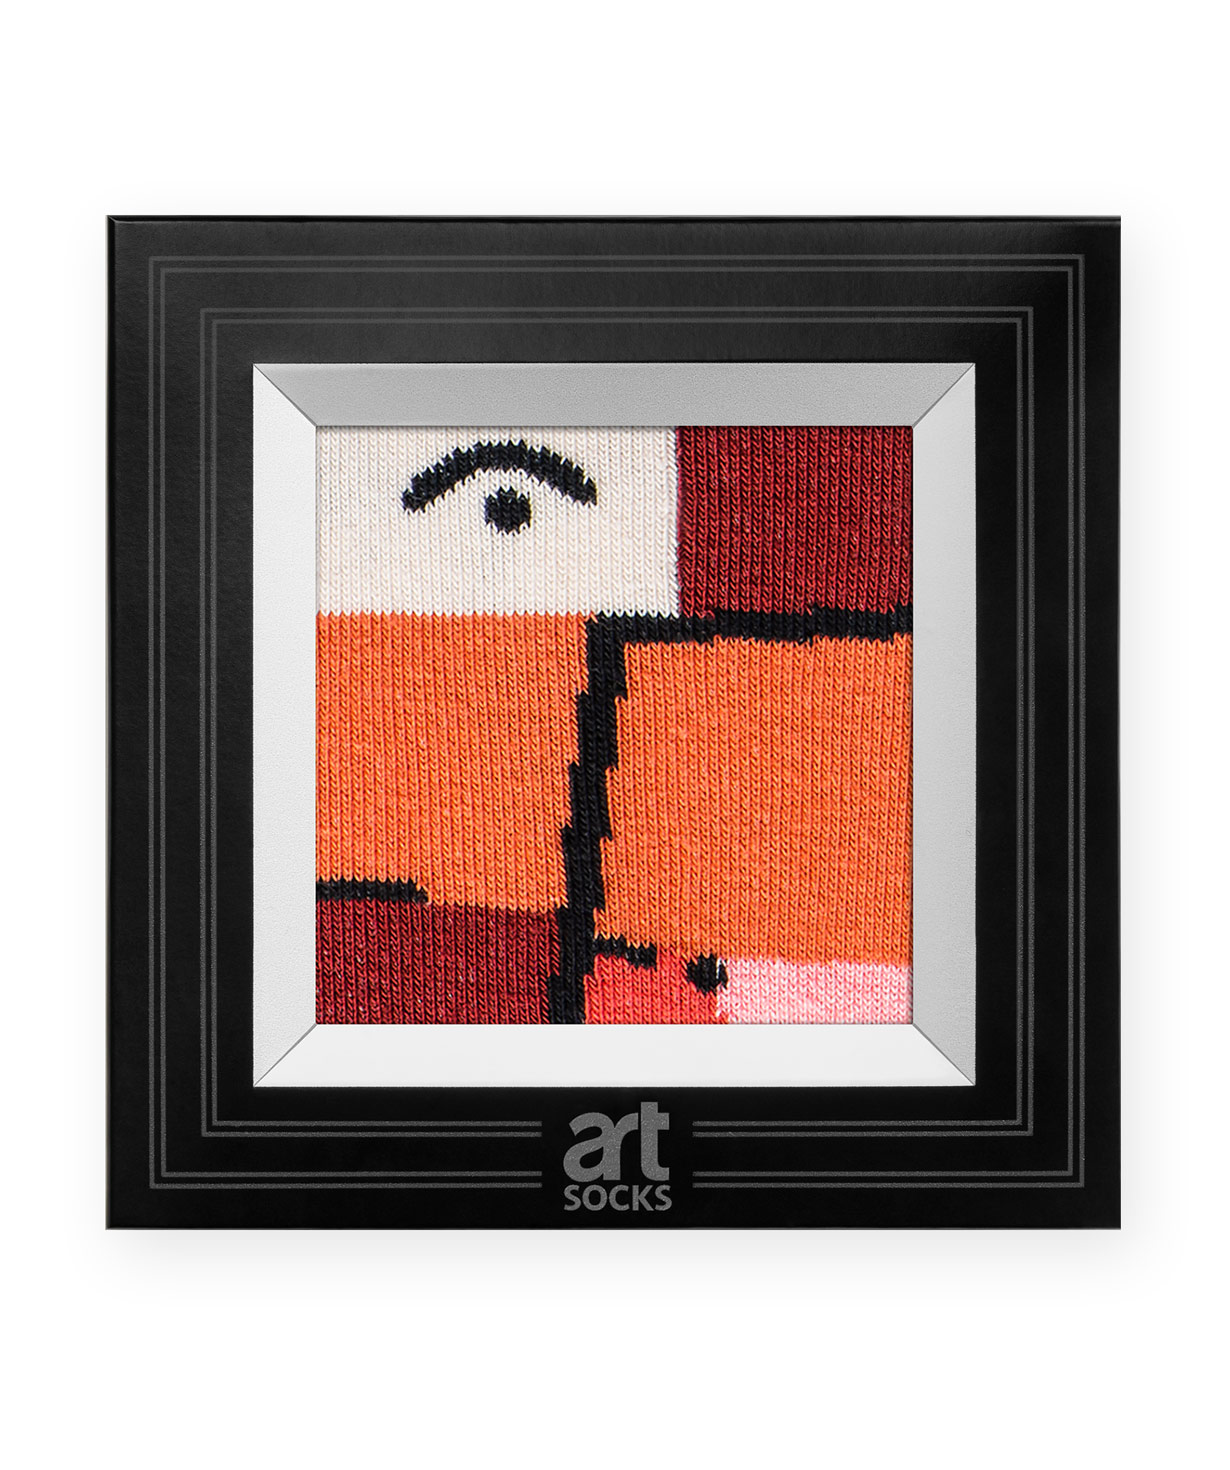 Socks `Art socks` with `Look through the red` painting